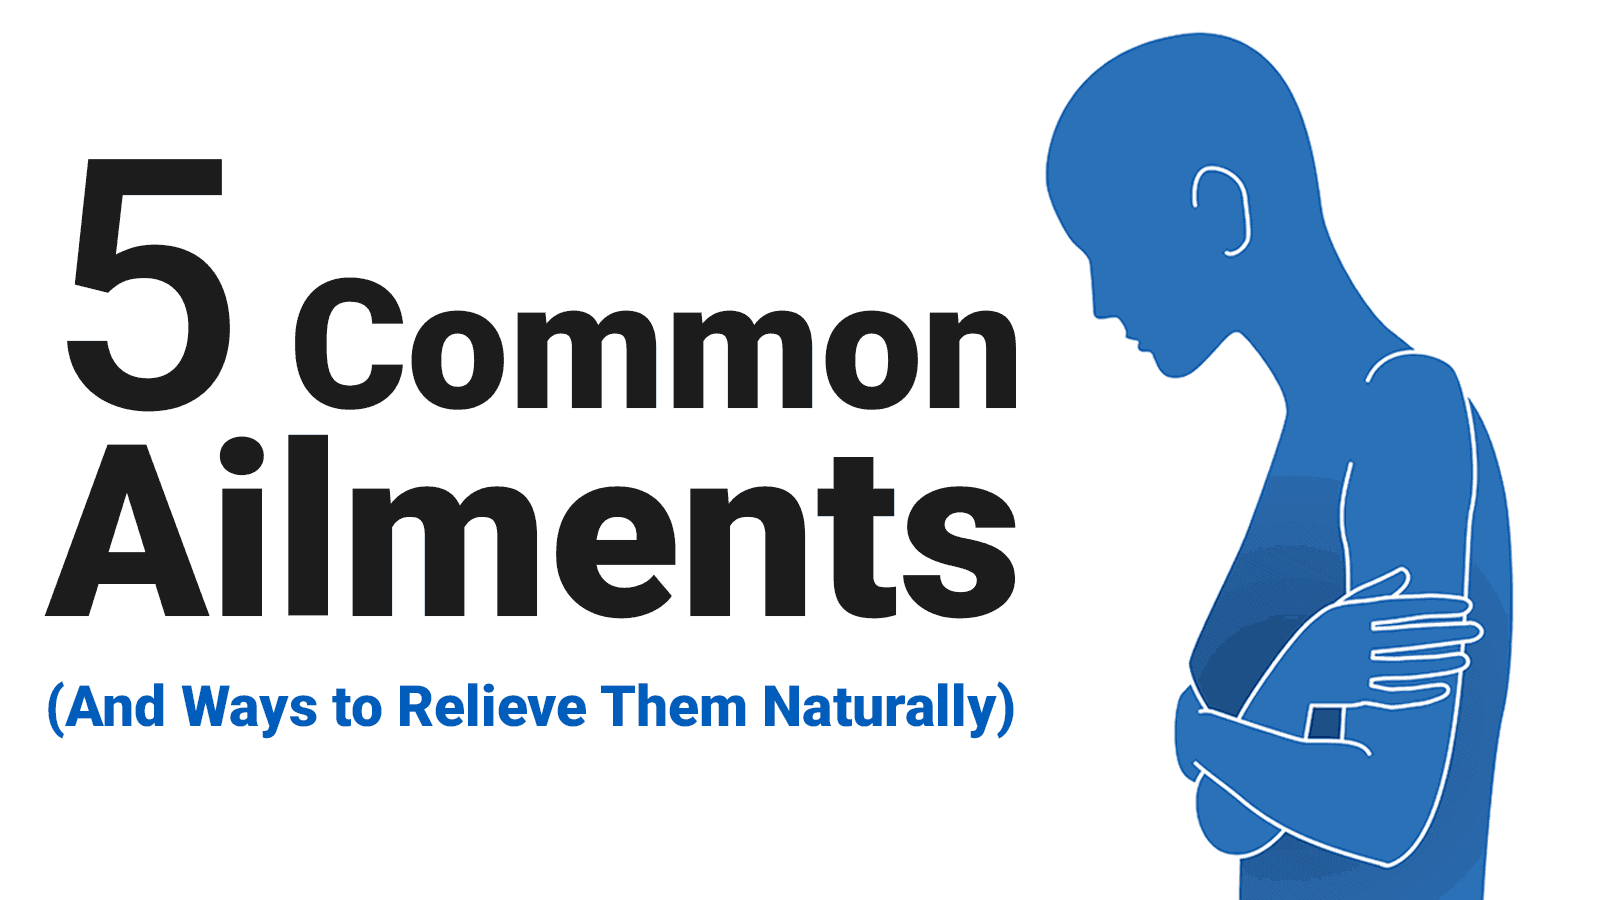 5 Common Ailments (And Easy Ways to Relieve Them Naturally)